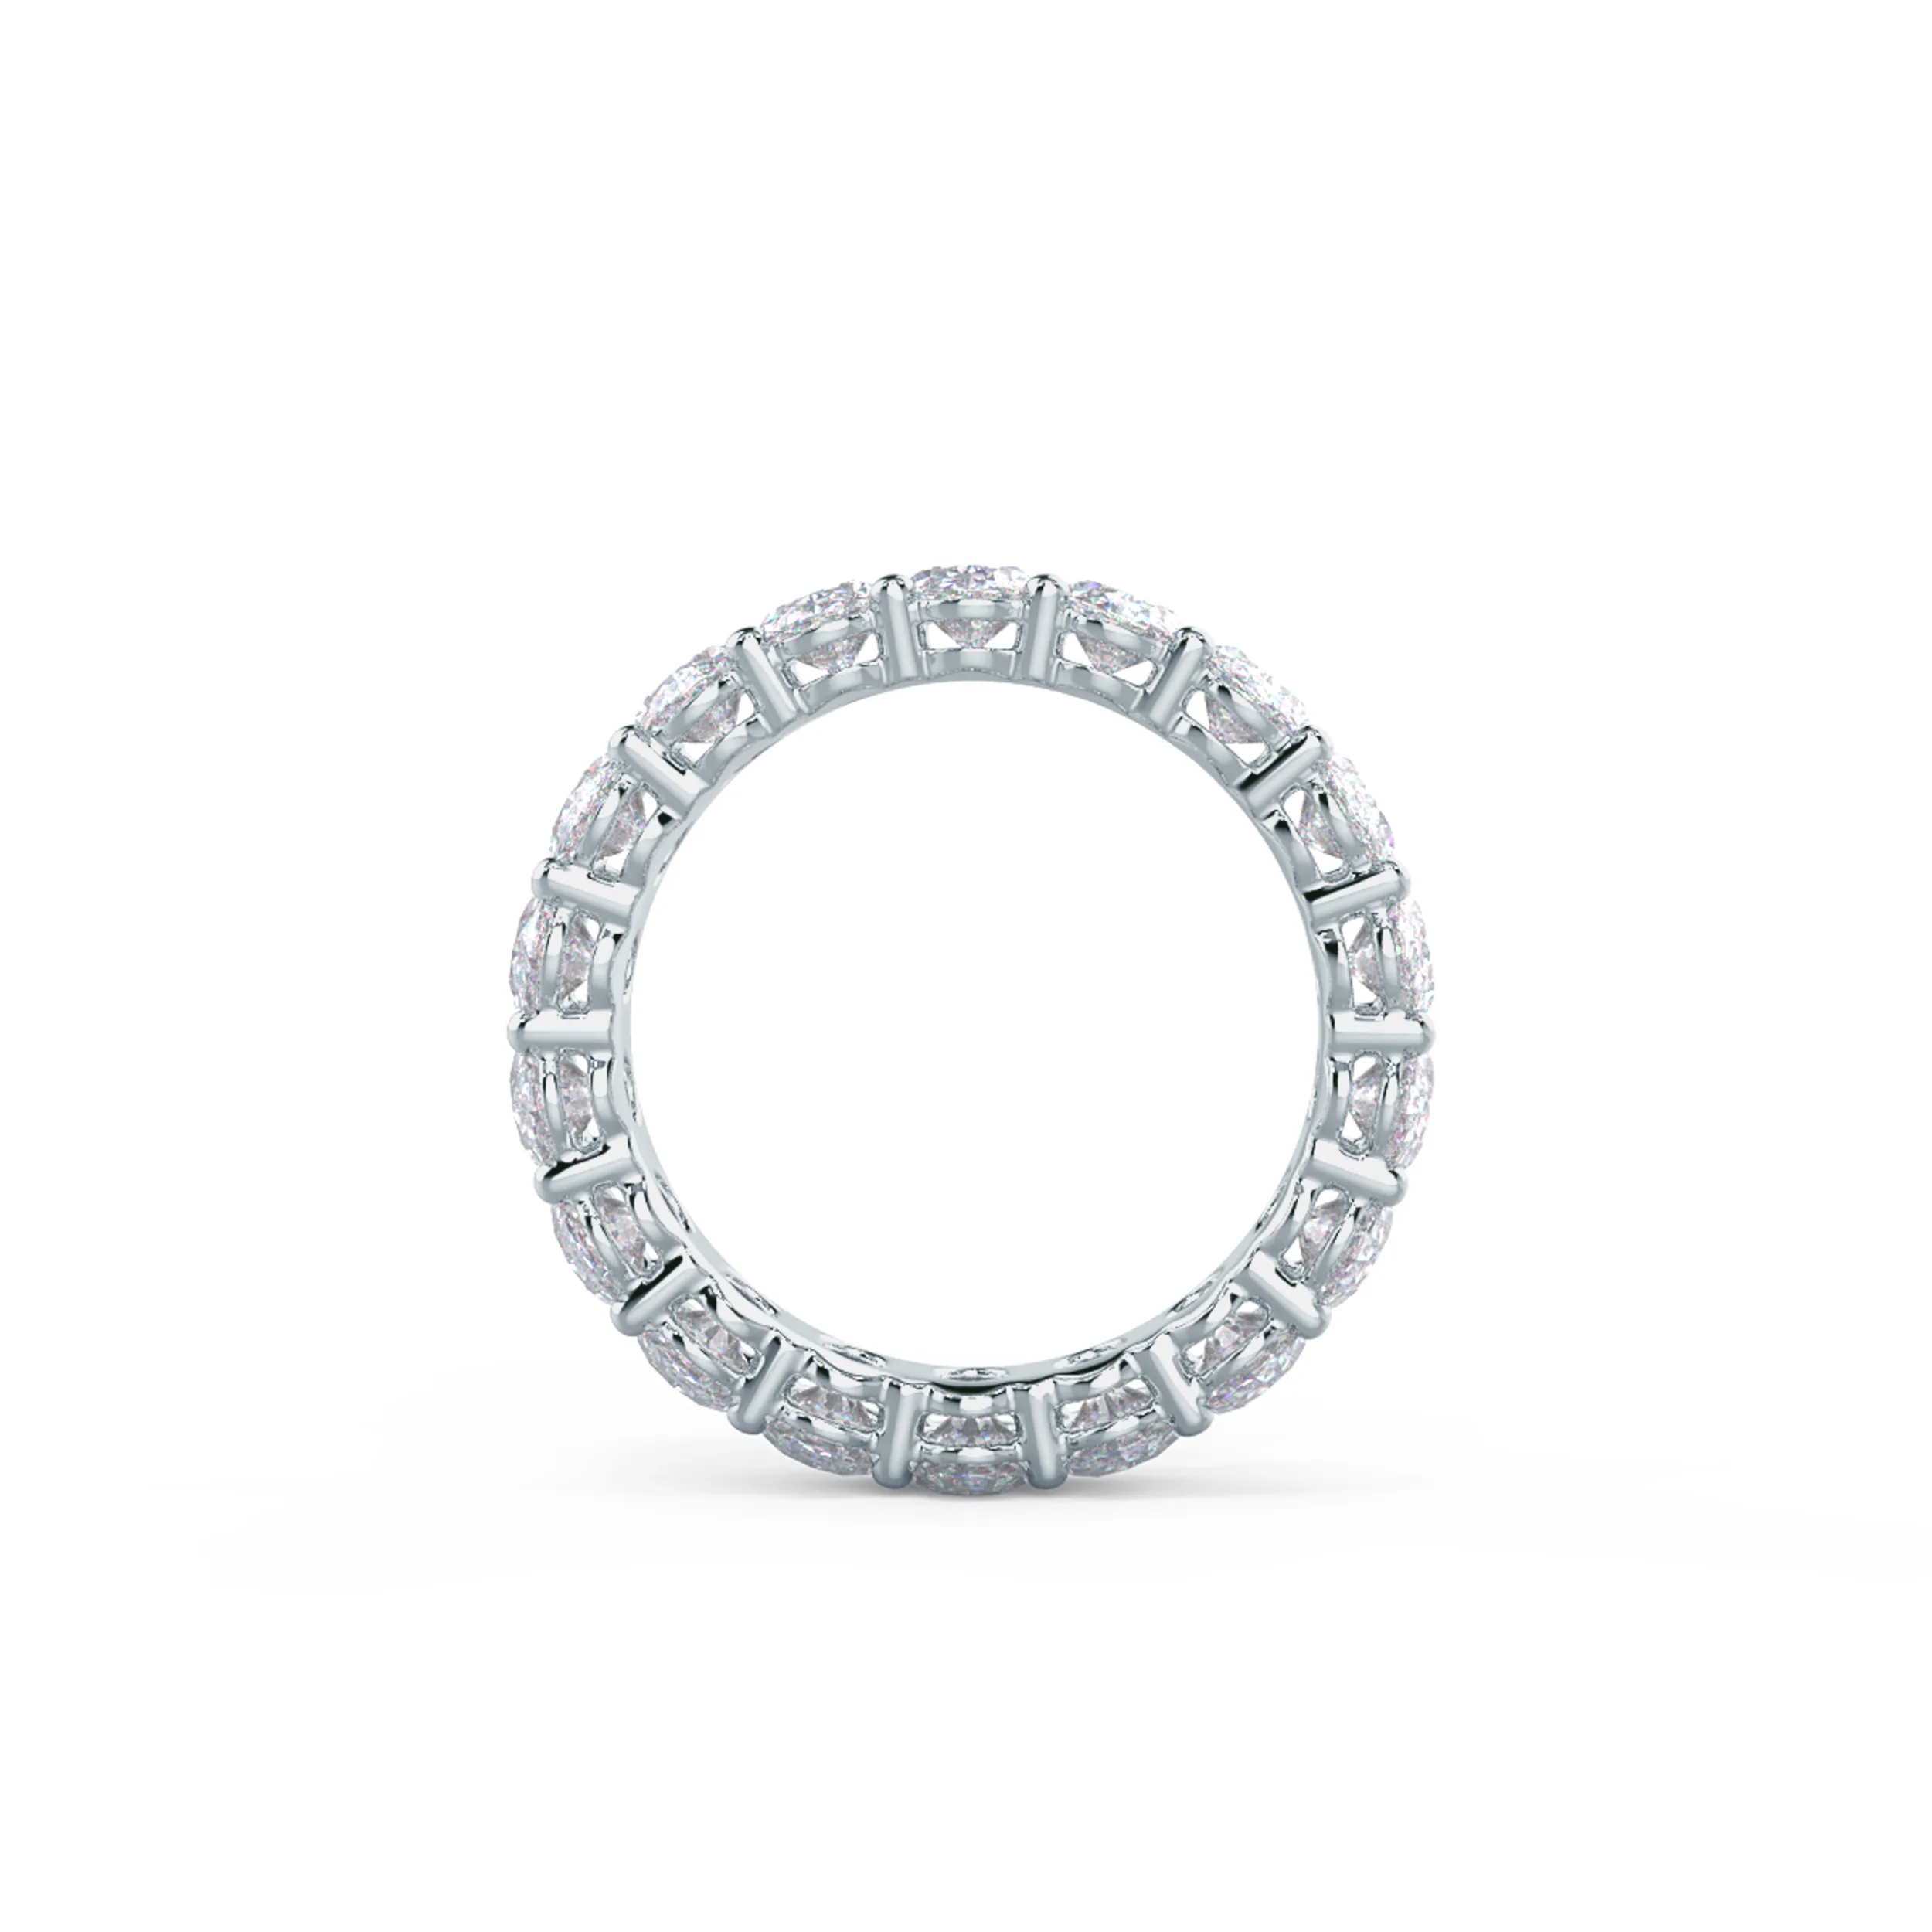 18k White Gold Oval Basket Eternity Band featuring Exceptional Quality 5.5 Carat Diamonds (Profile View)